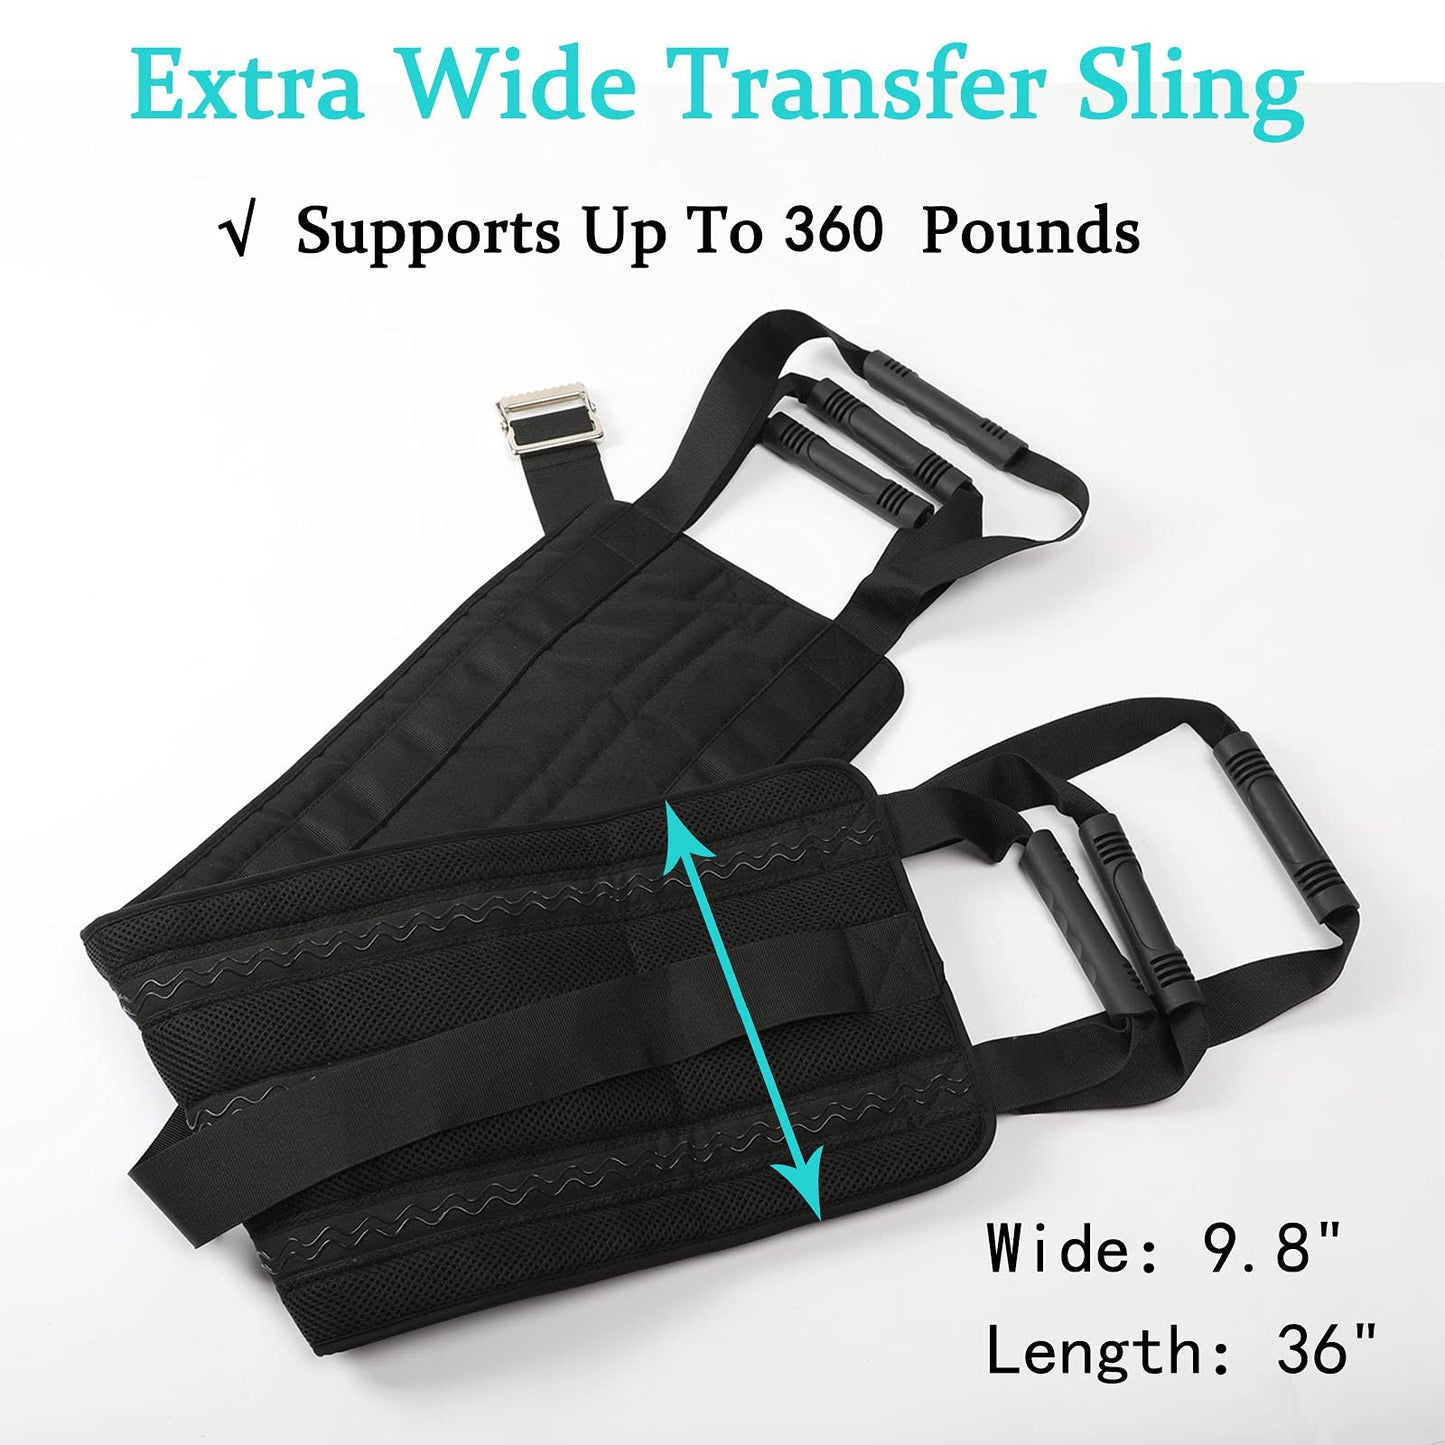 Fanwer 36-Inch Padded Patient Transfer Sling with Handles